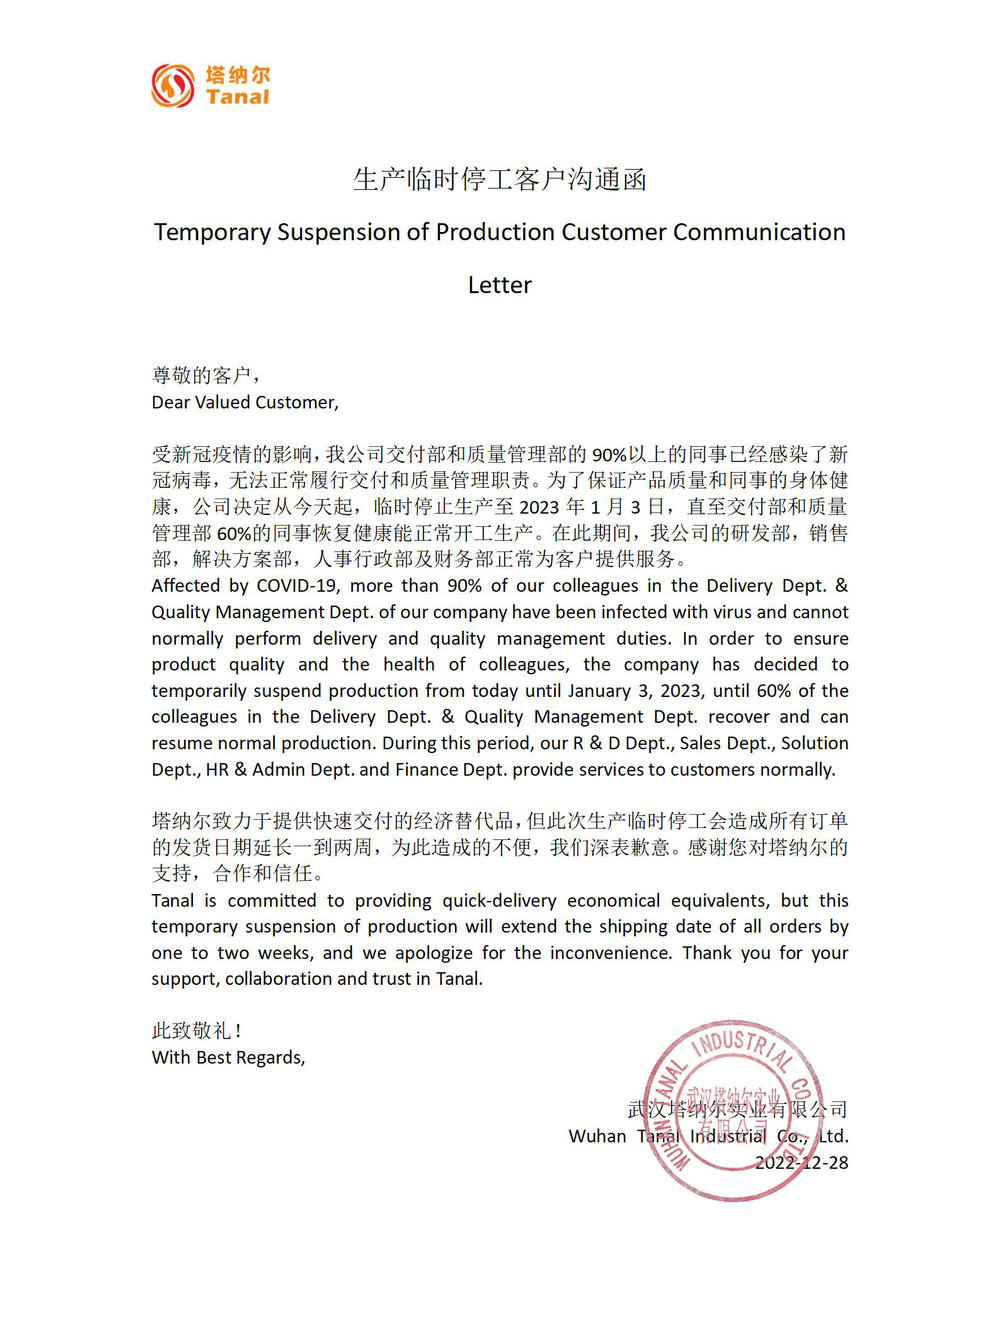 Temporary Suspension of Production Customer Communication Letter